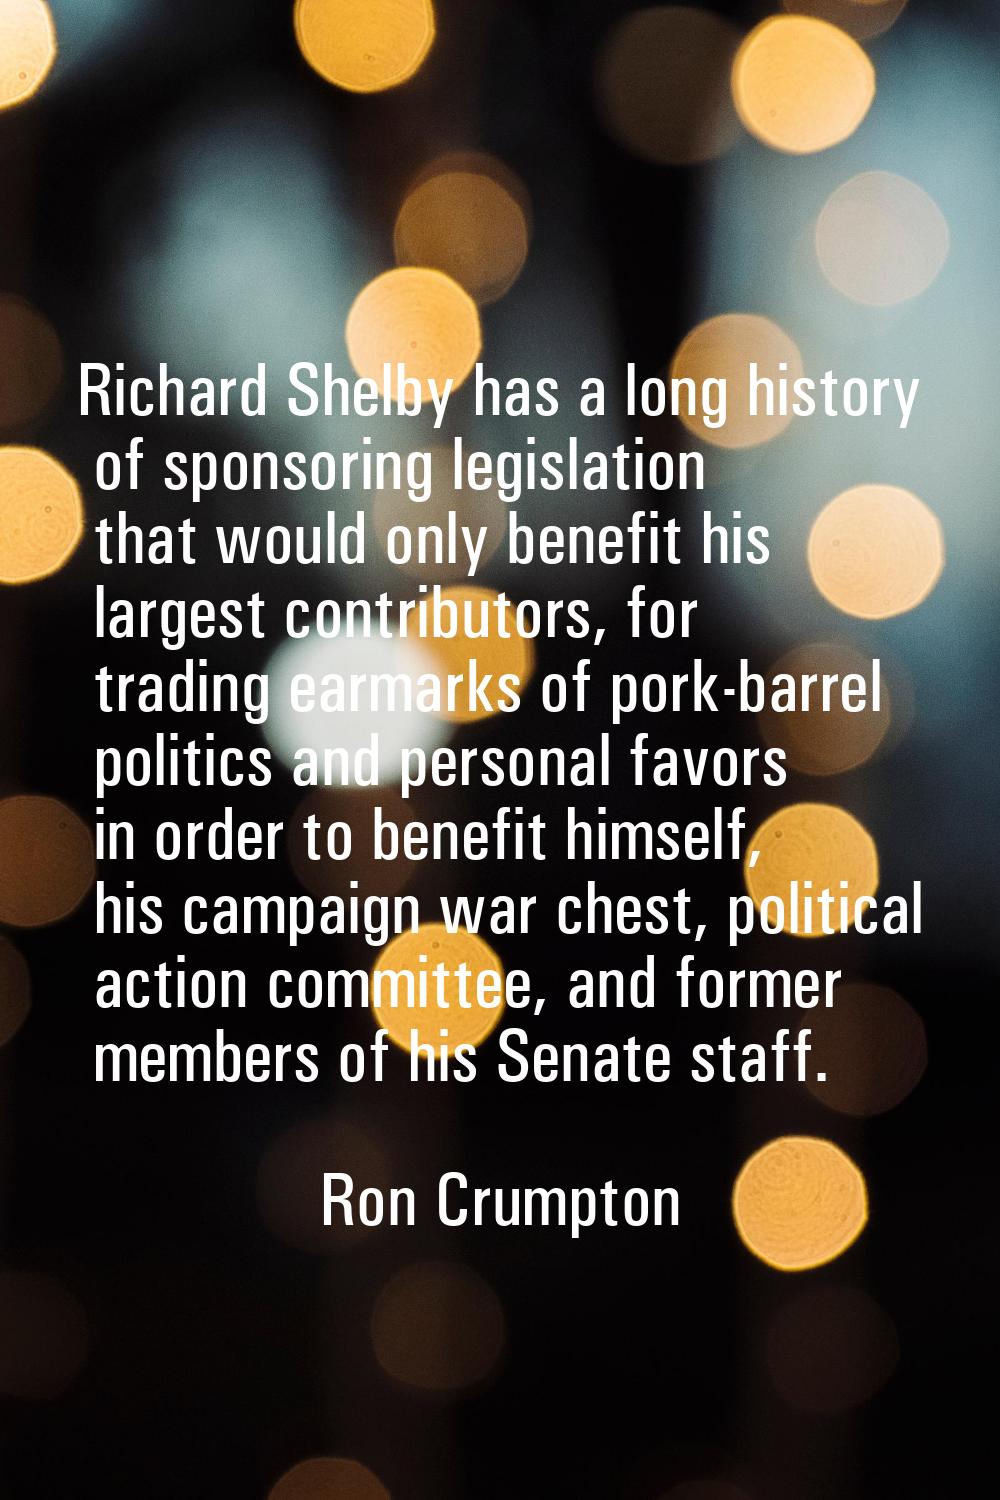 Richard Shelby has a long history of sponsoring legislation that would only benefit his largest con